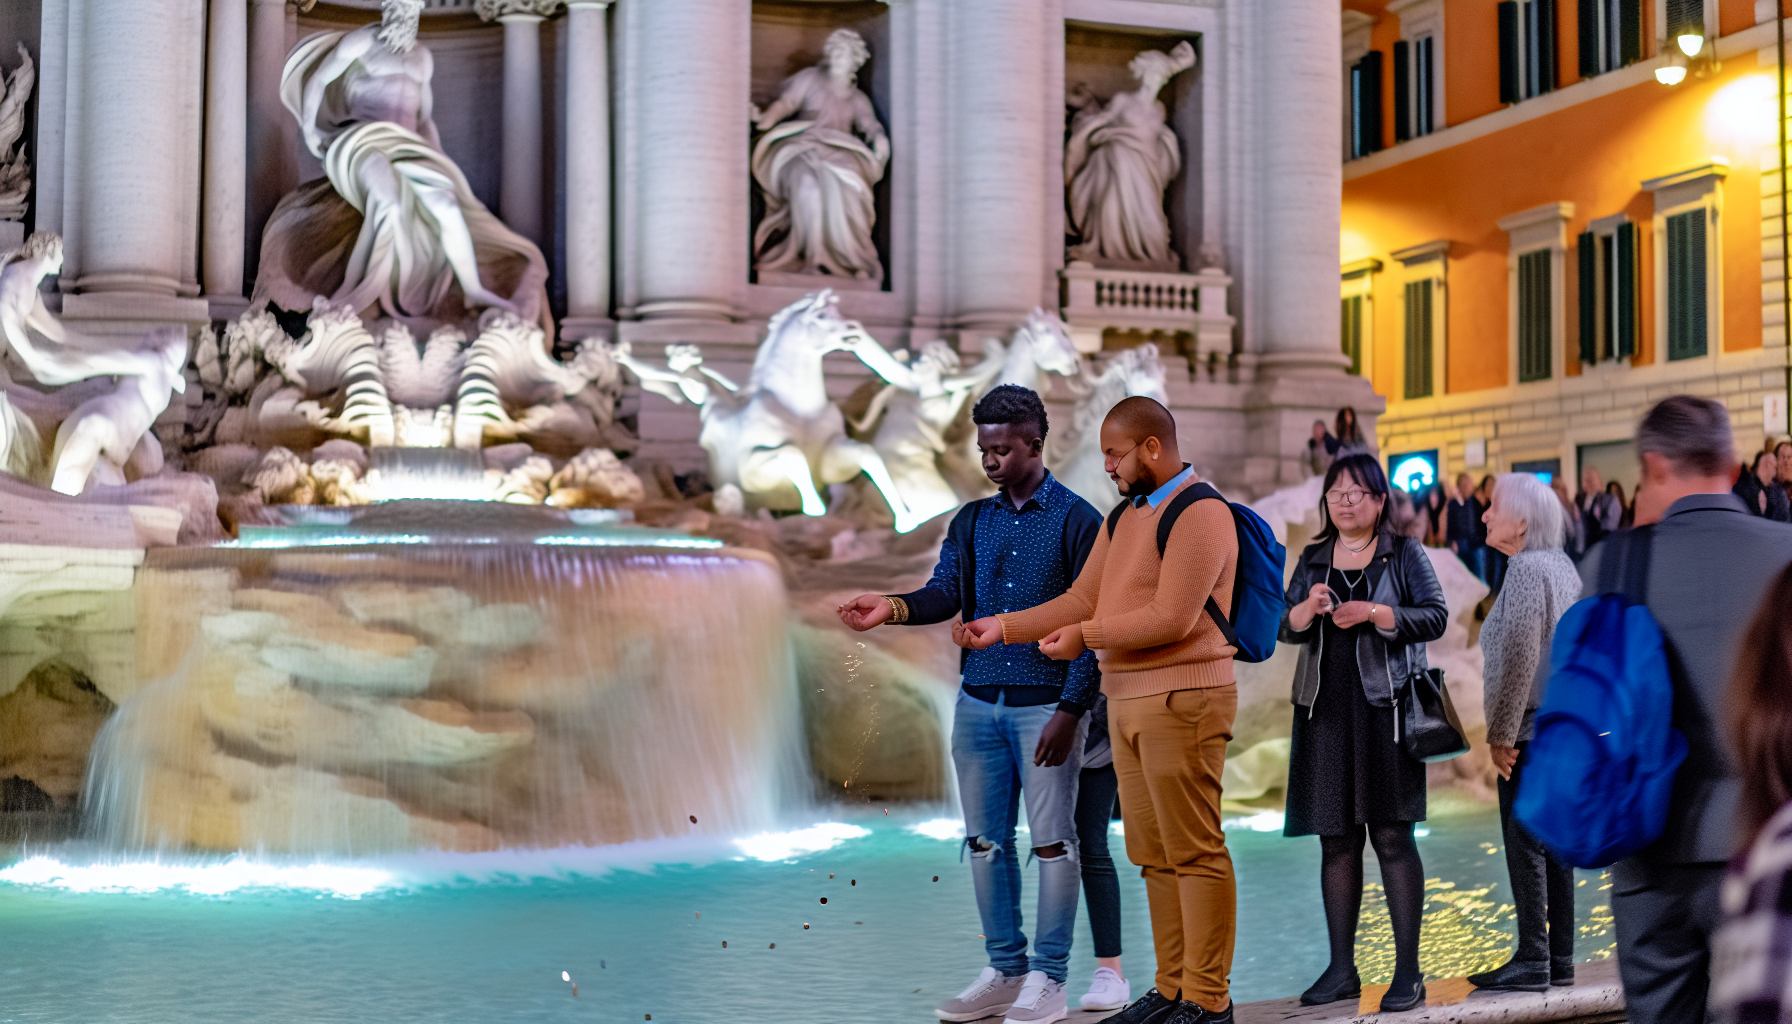 Coins being tossed into the Trevi Fountain